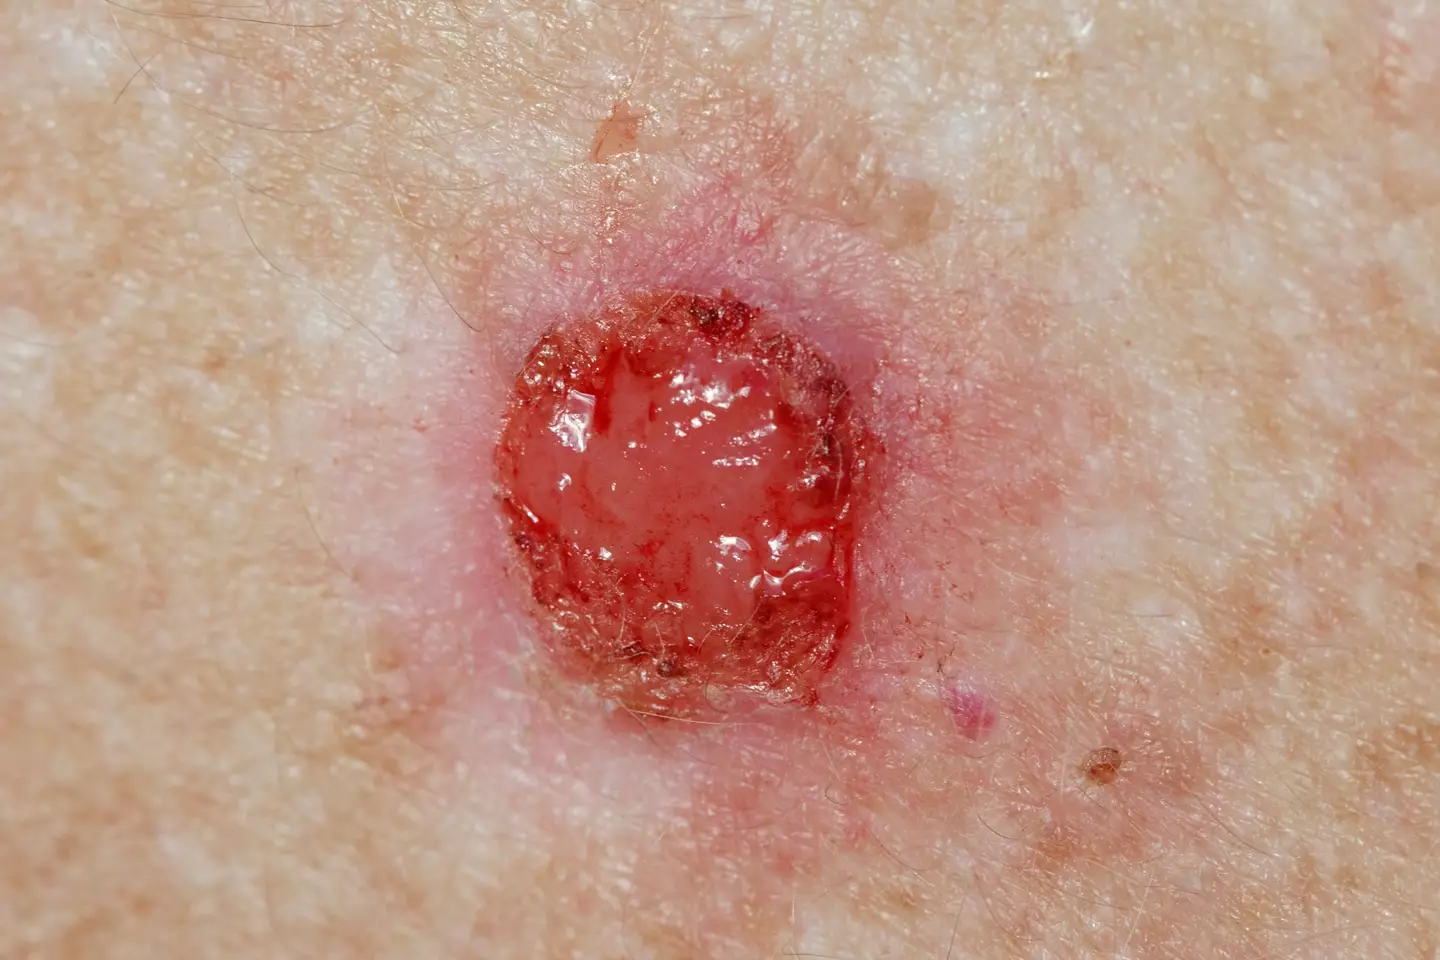 These sores can also appear as red lumps and can bleed.